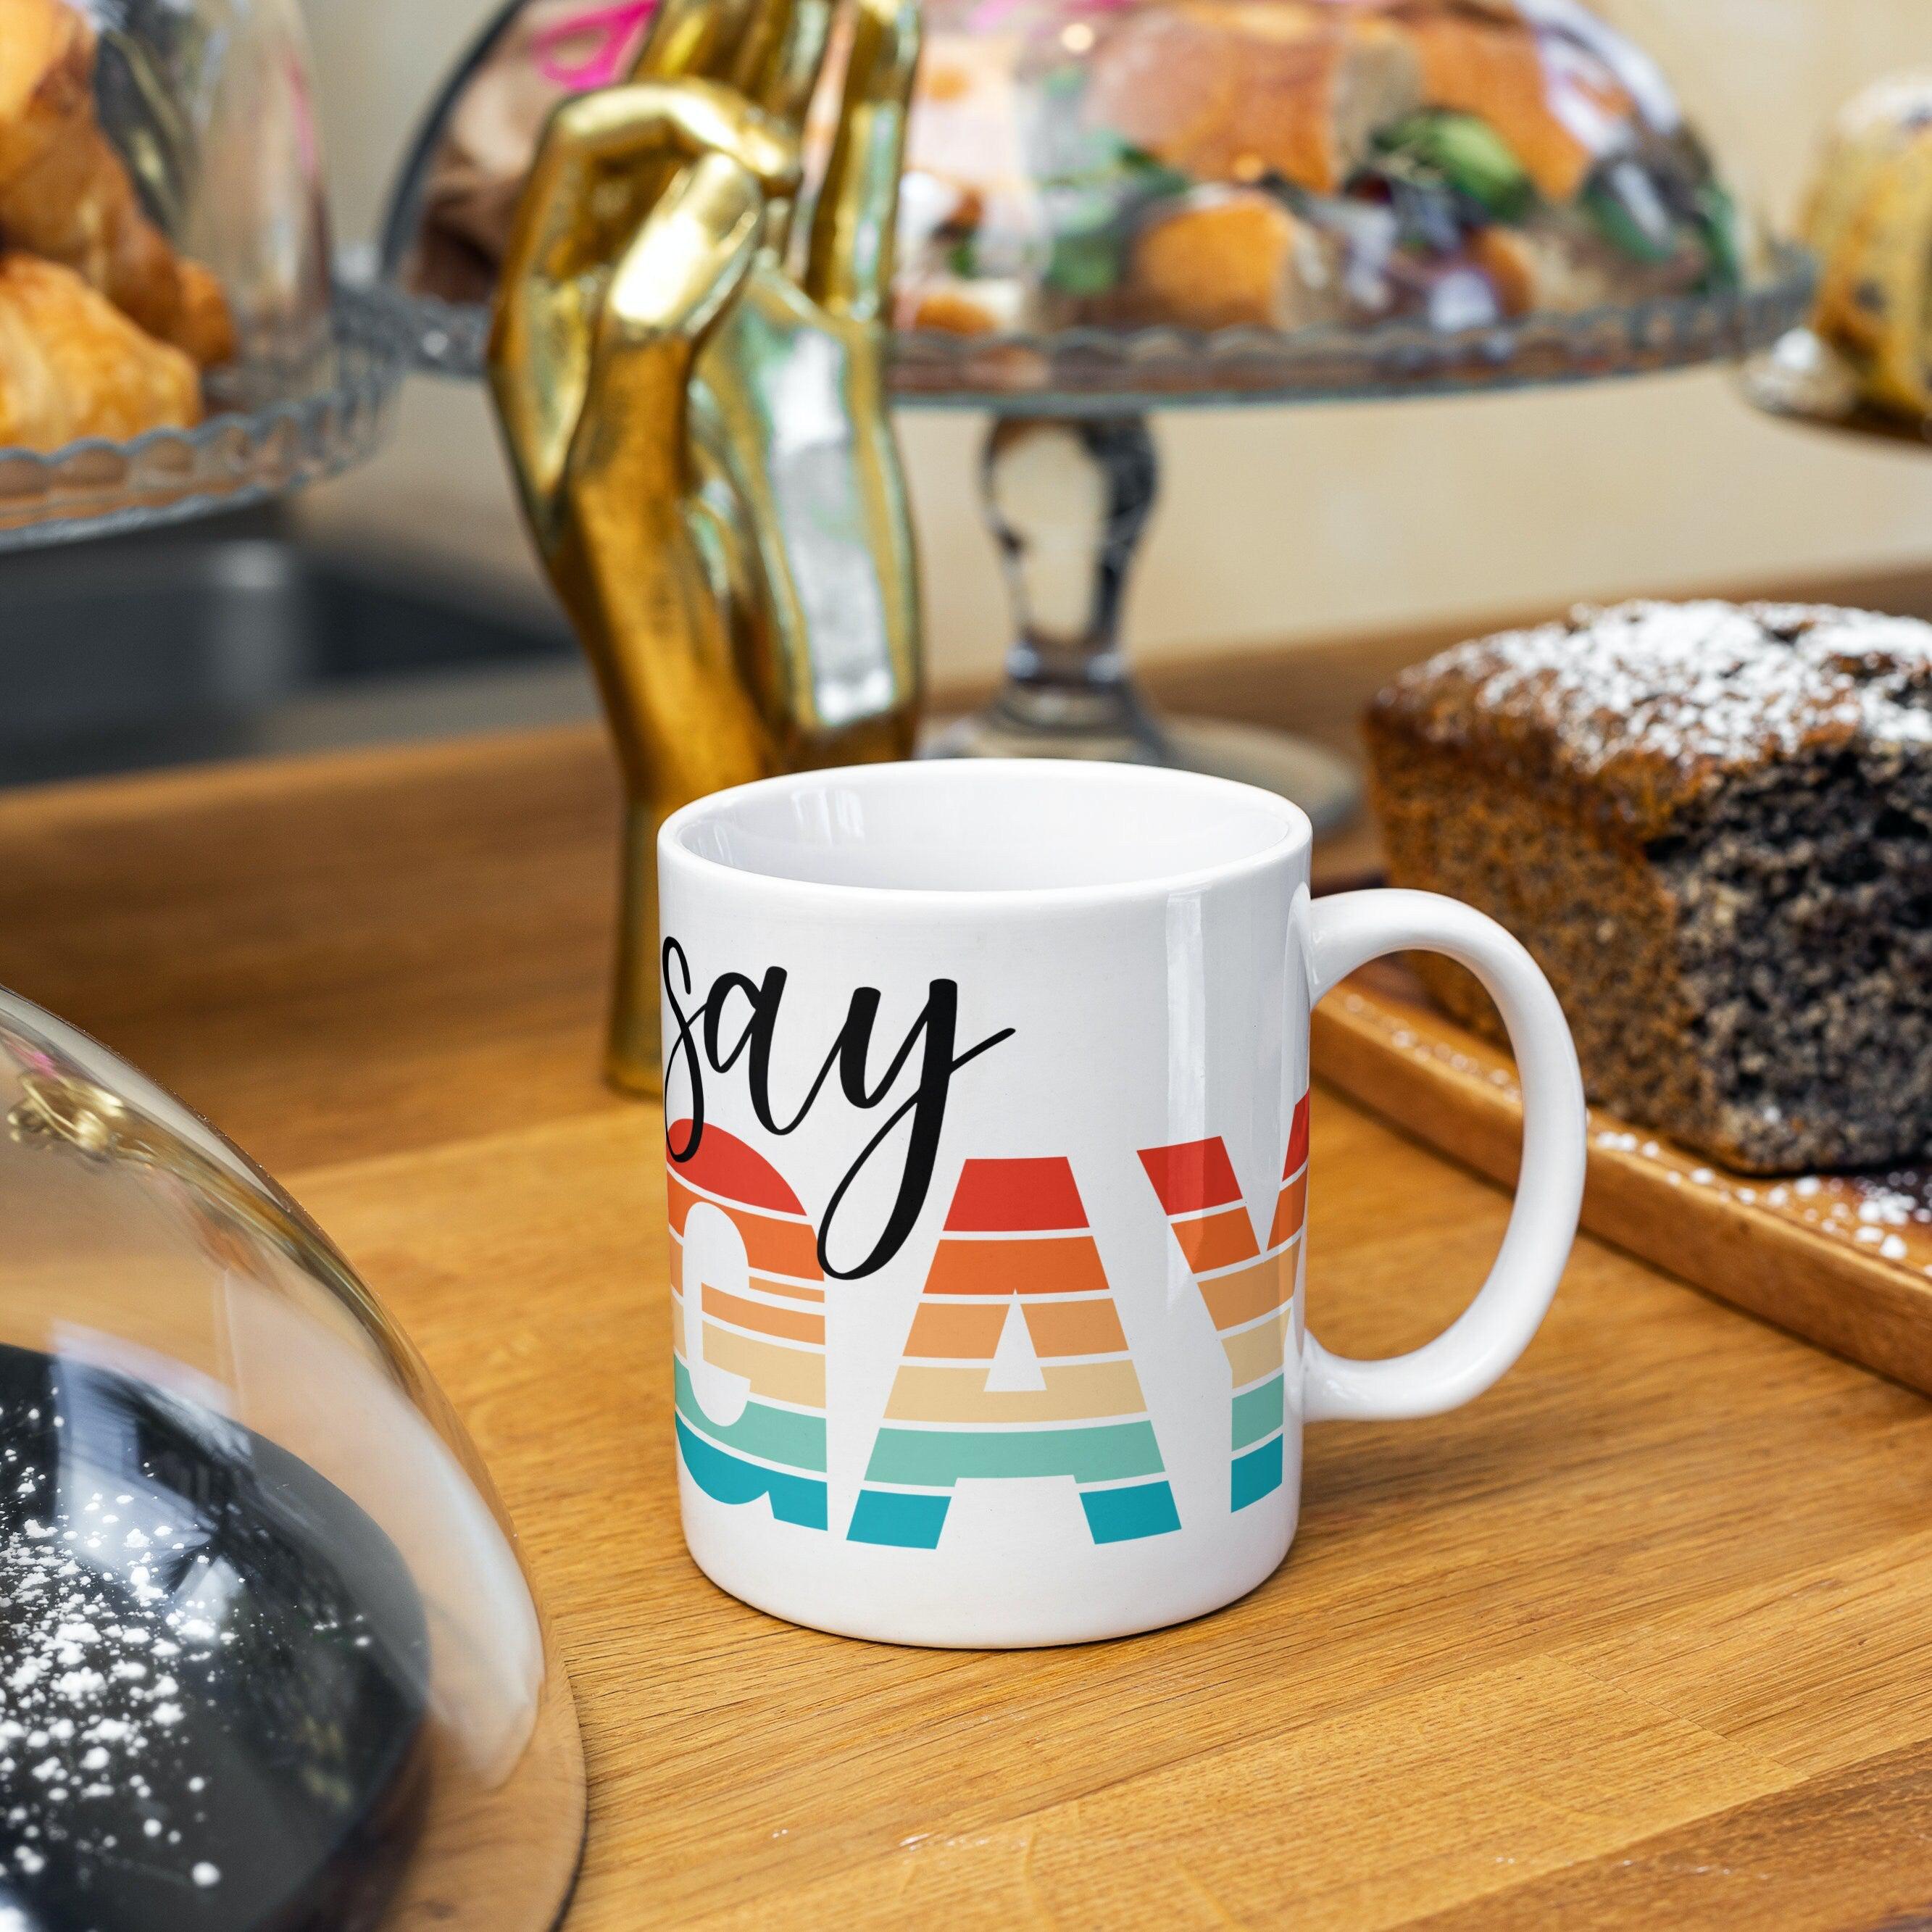 Say Gay Coffee Mug - Political PRIDE Coffee Cup for Work - Gift for LGBTQIA+ Friend - Pride Party Coffee Cup - Gay Pride Decor for Them